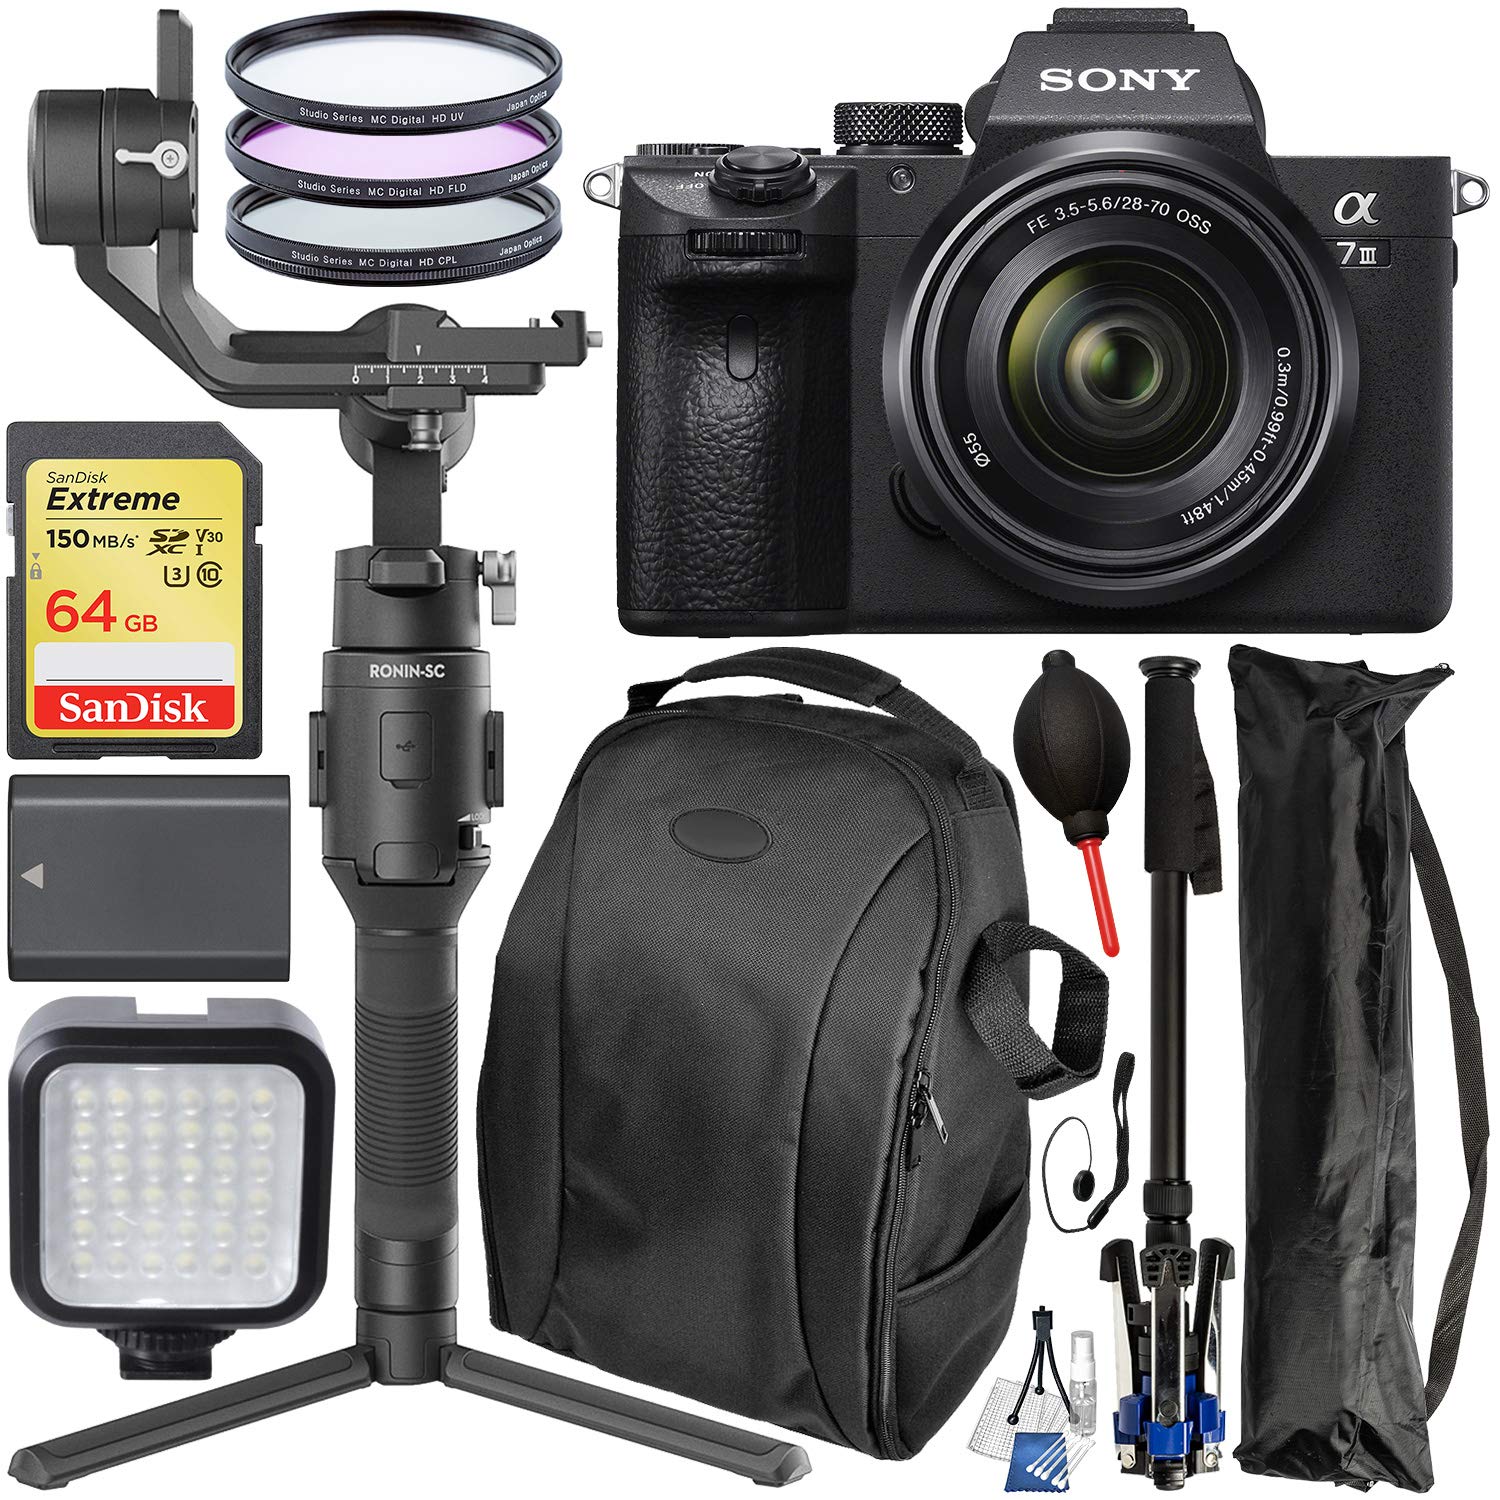 Sony Alpha a7 III Mirrorless Digital Camera with 28-70mm Lens - ILCE7M3K/B and DJI Ronin-SC Gimbal Stabilizer - CP.RN.00000040.01 and Essential Accessory Bundle